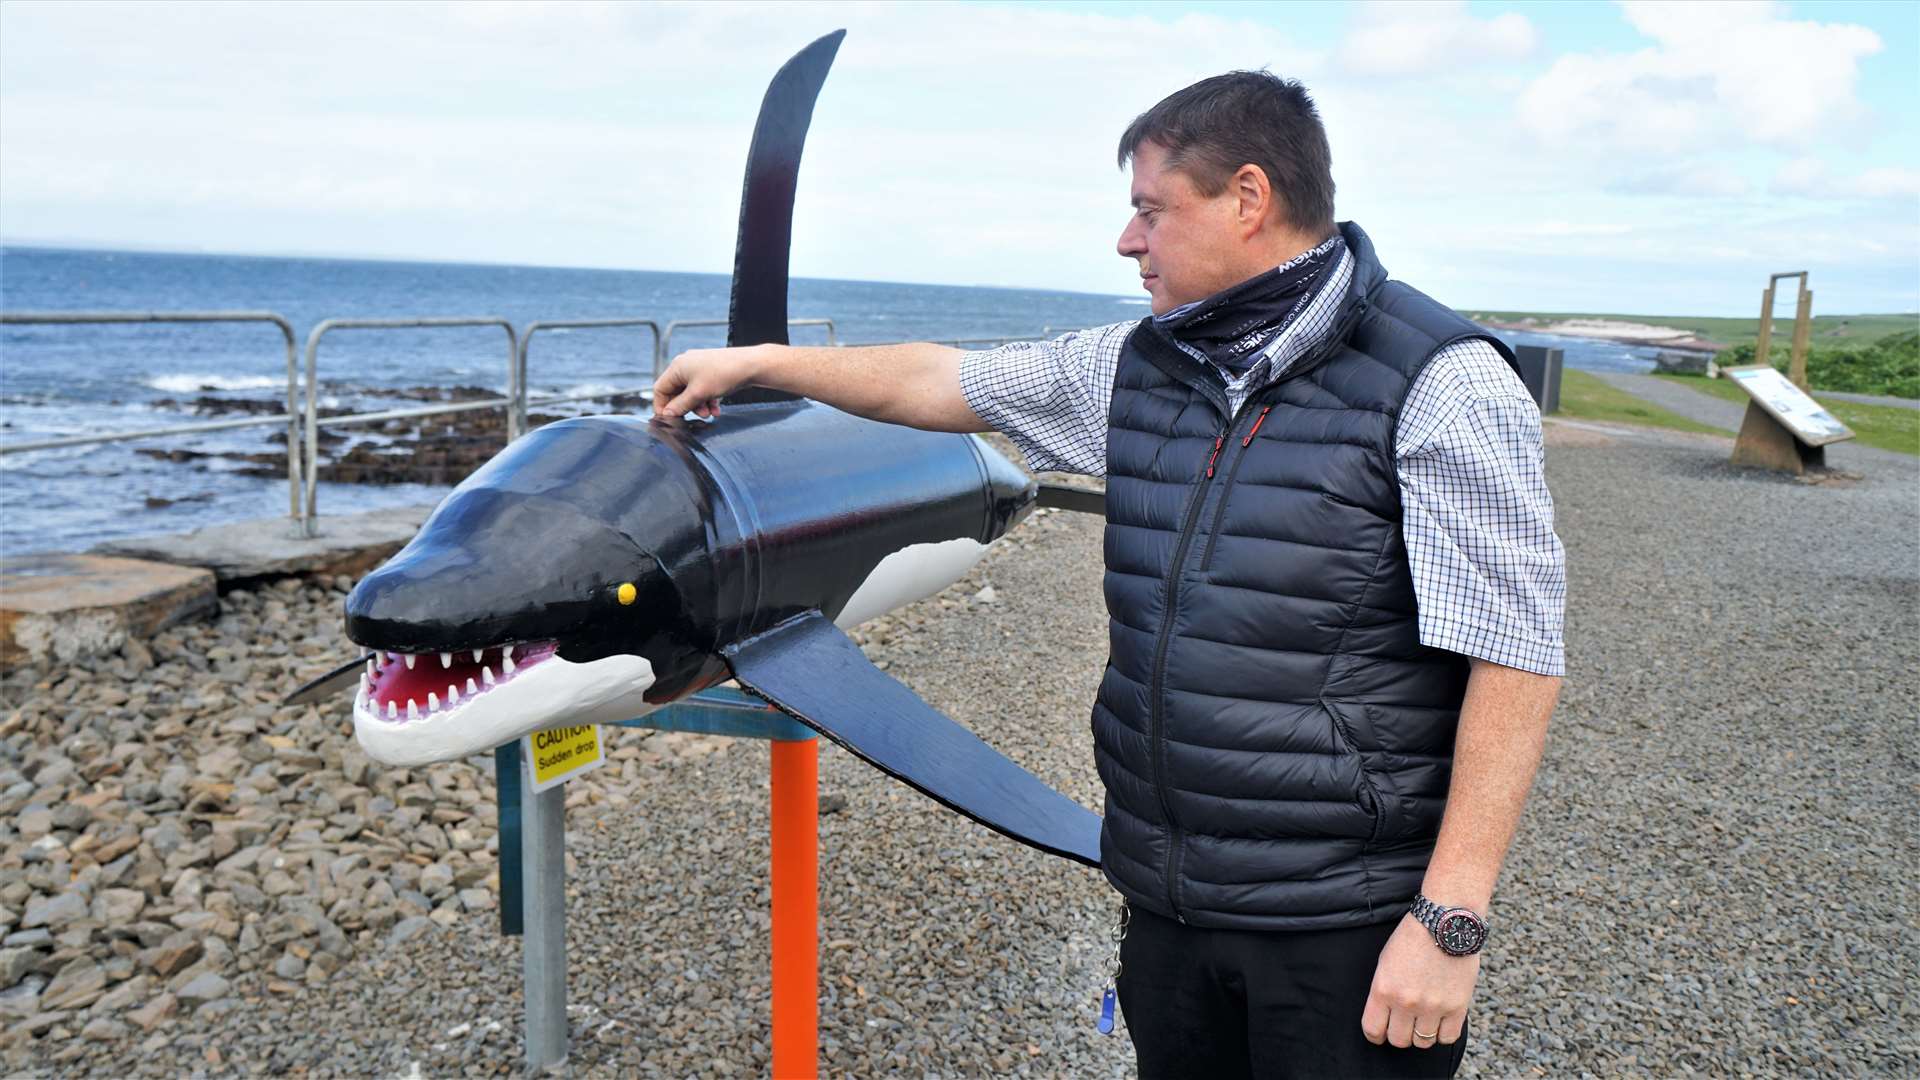 Andrew Mowat runs the Seaview Hotel and is a trustee of the John O'Groats Trail. He showed how an orca sculpture, constructed by Robbie Anderson, will be incorporated into a new pathway. The so-called 'Wishing Whale' will incorporate a water feature and allow people to drop coins into it and make wishes.